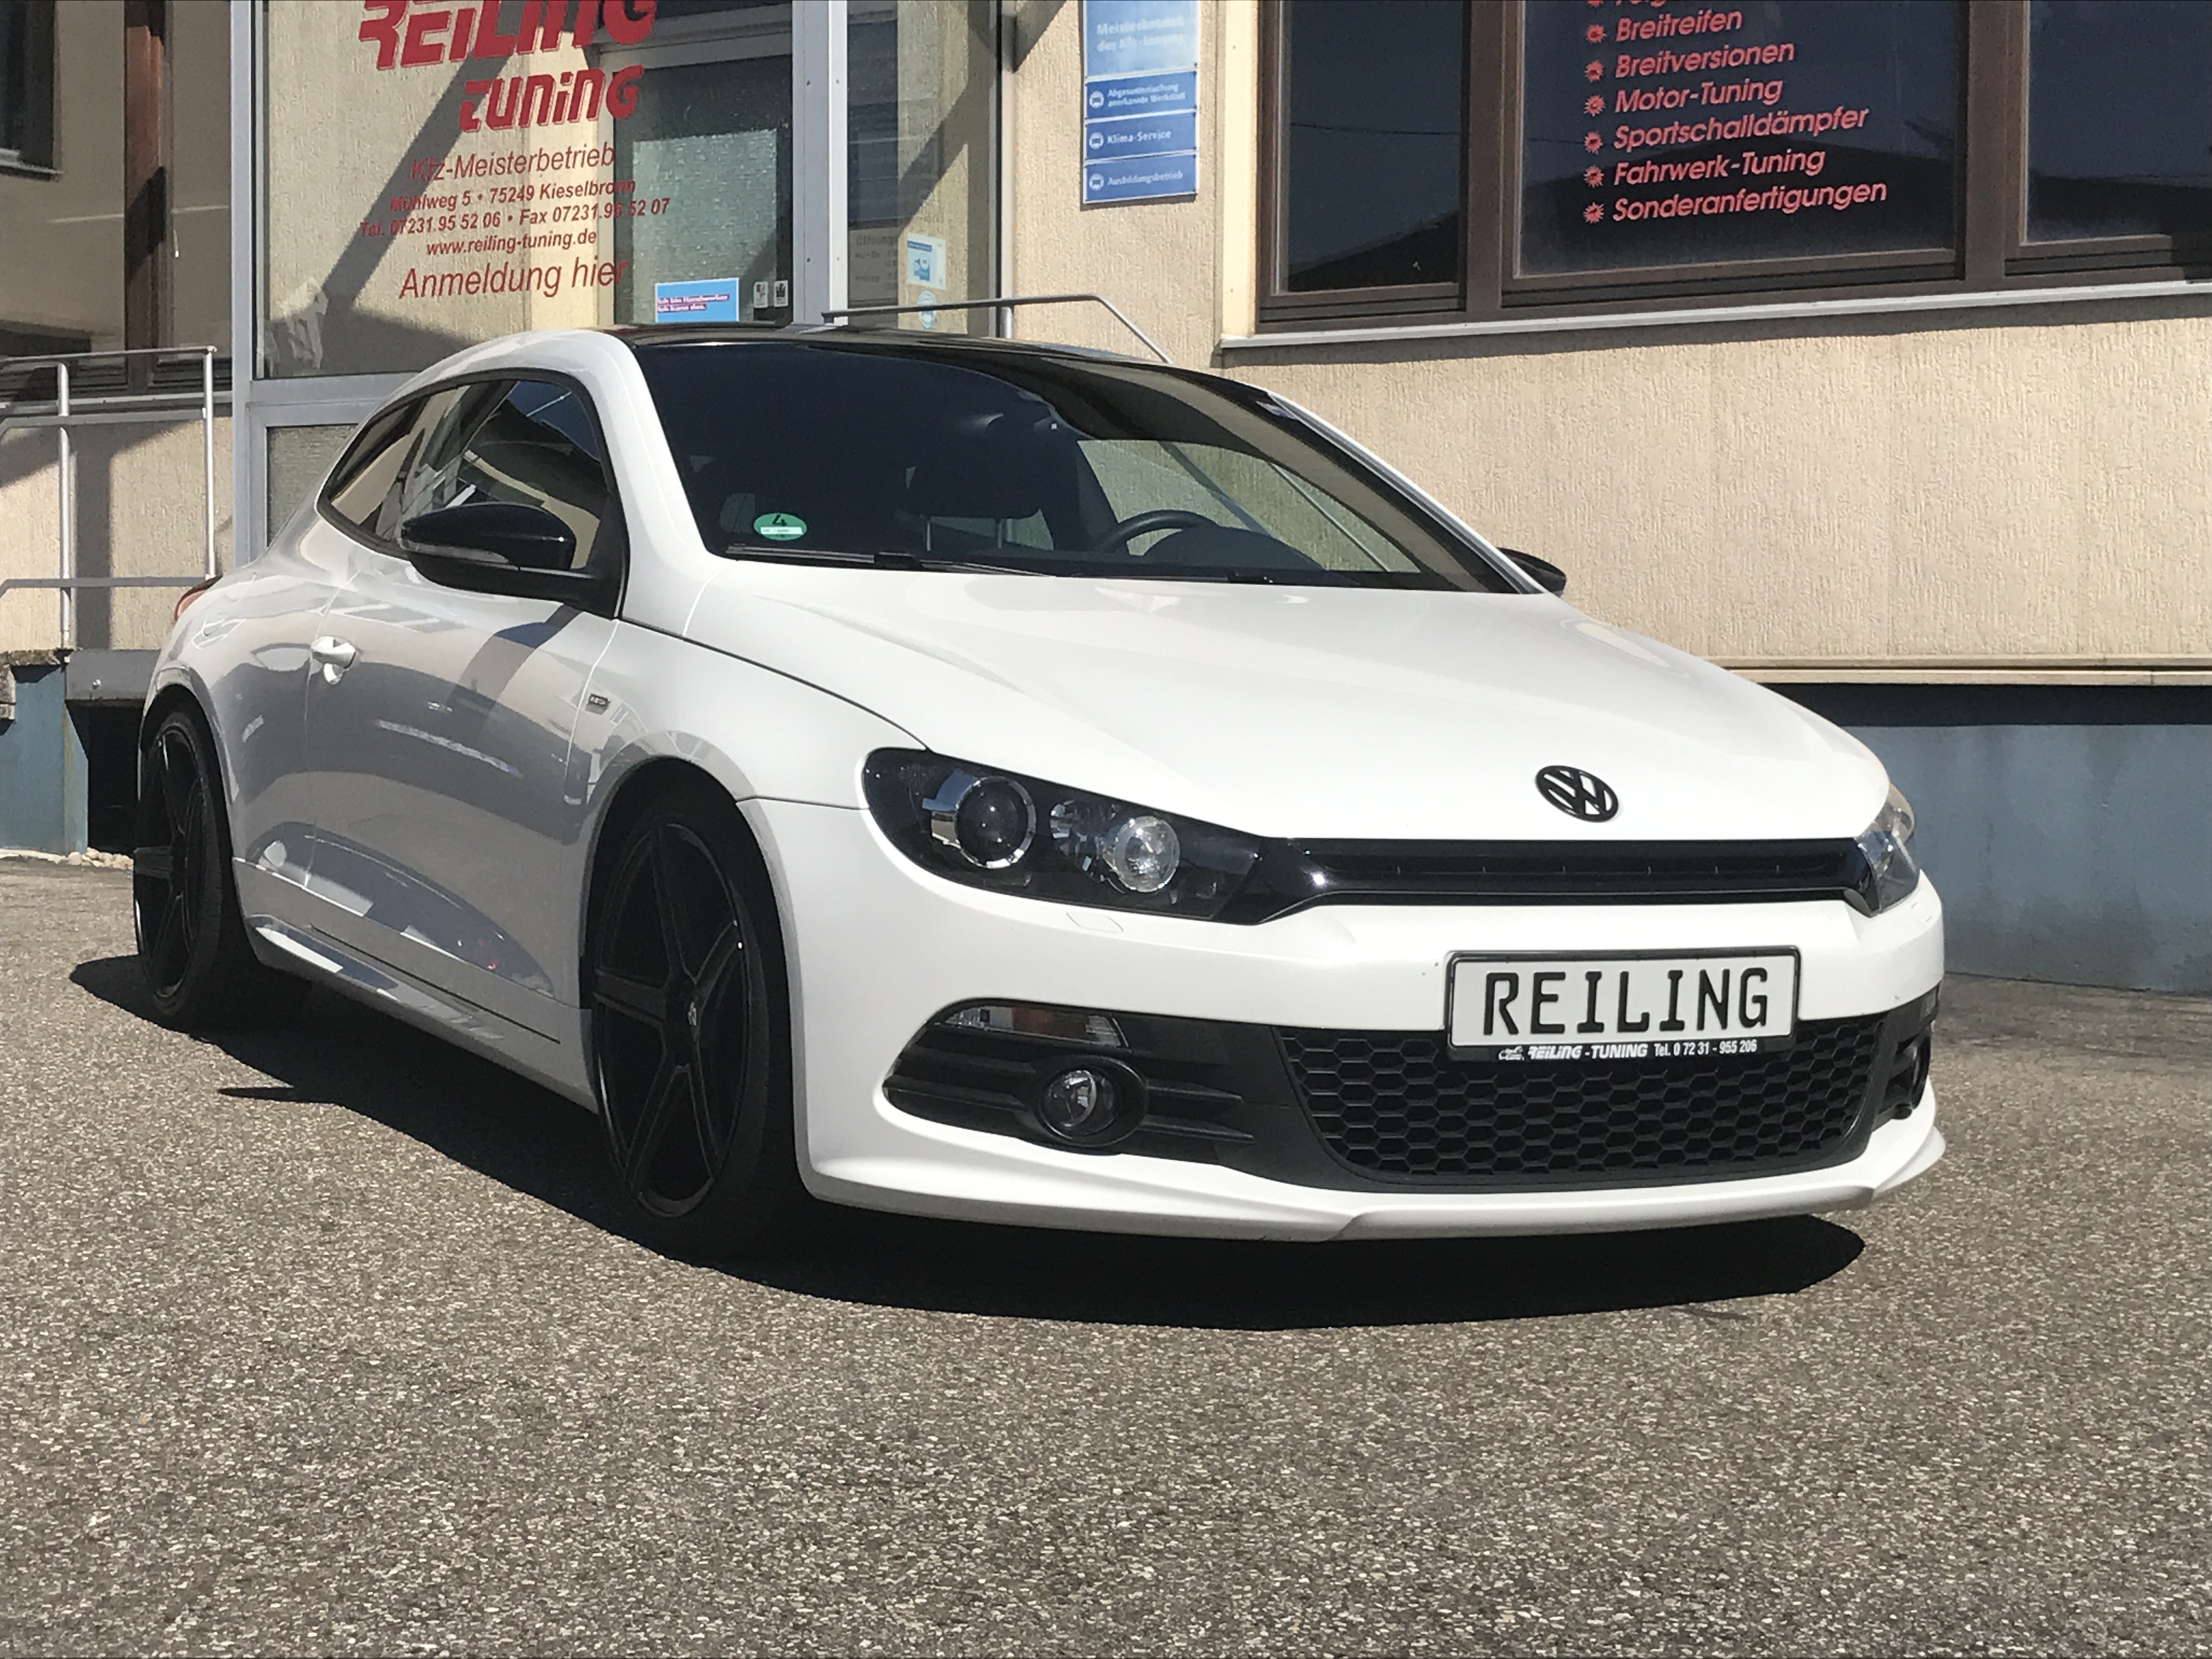 VW Scirocco - Reiling Tuning